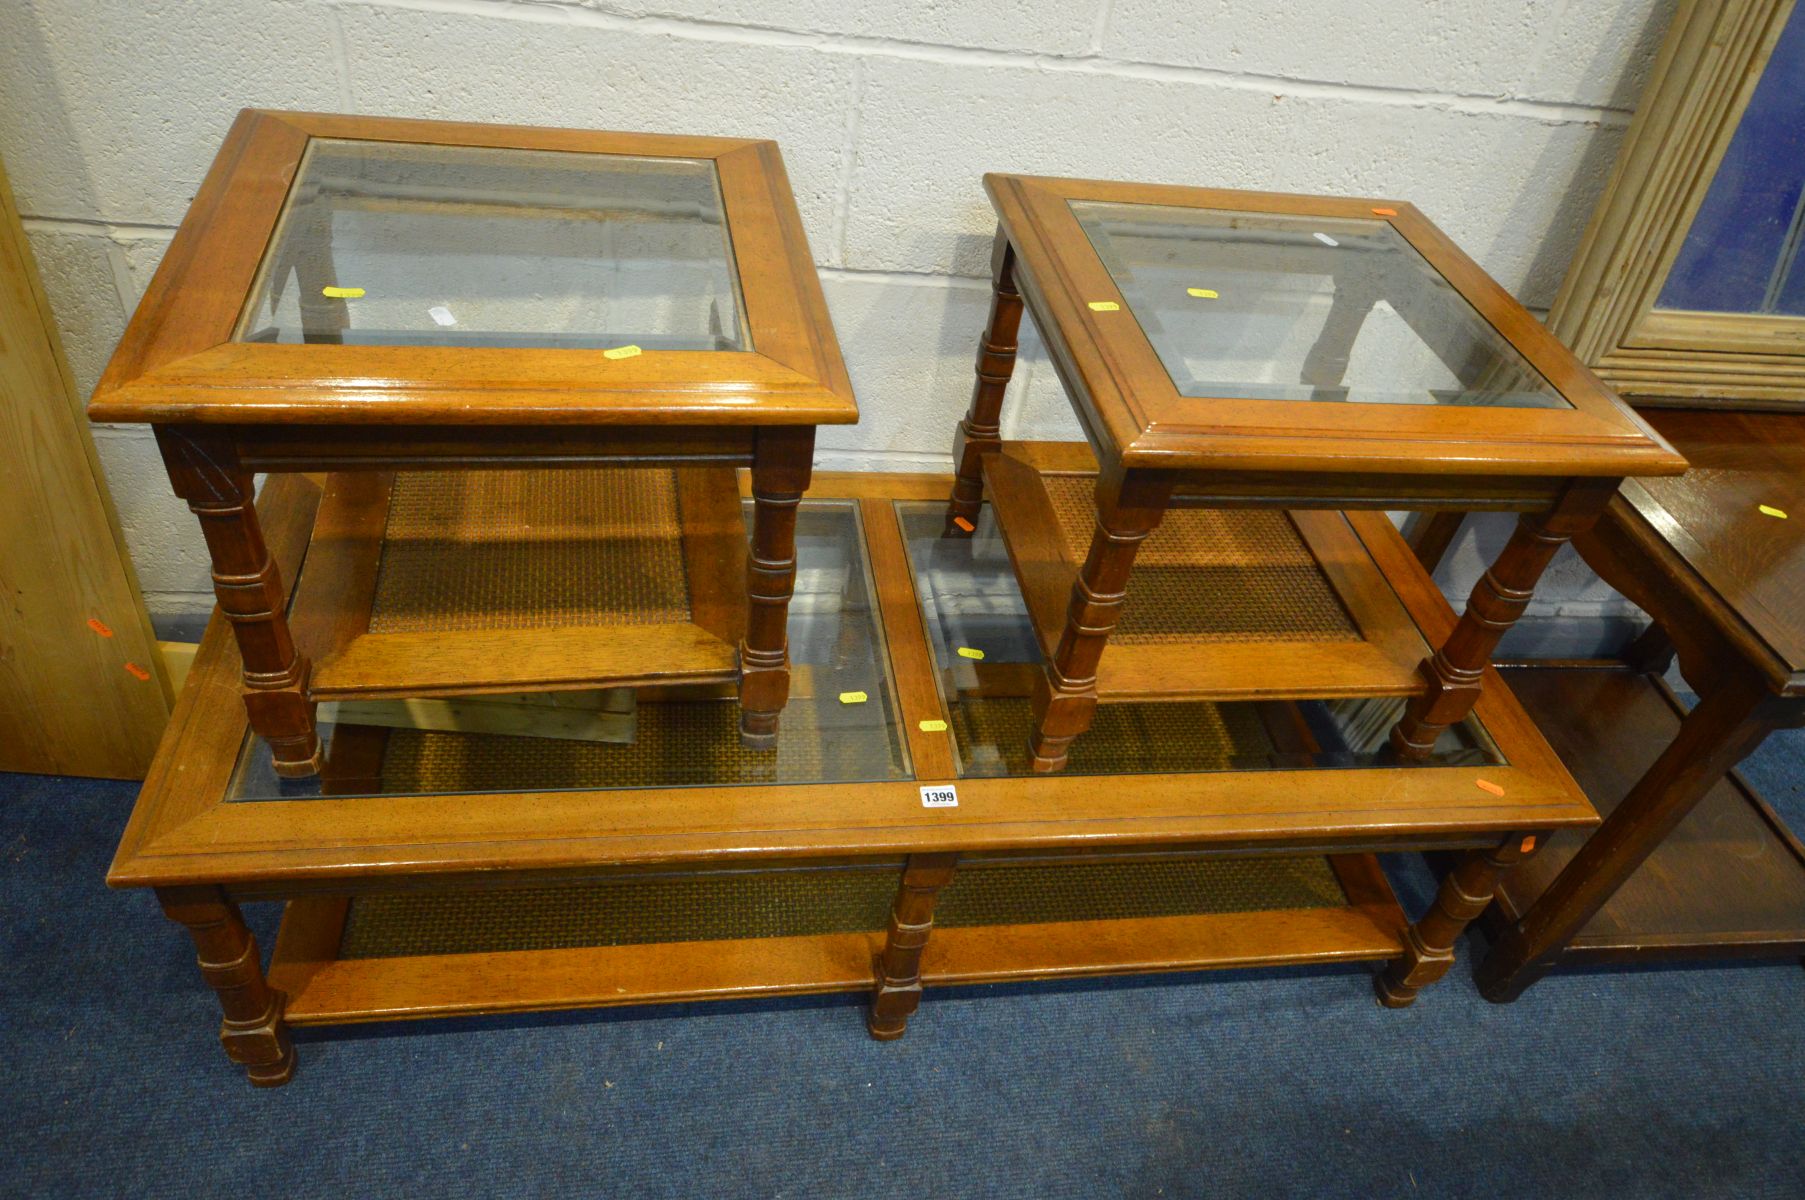 A CHERRYWOOD COFFEE TABLE with two glass inserts, and two matching occasional tables, along with - Image 2 of 4